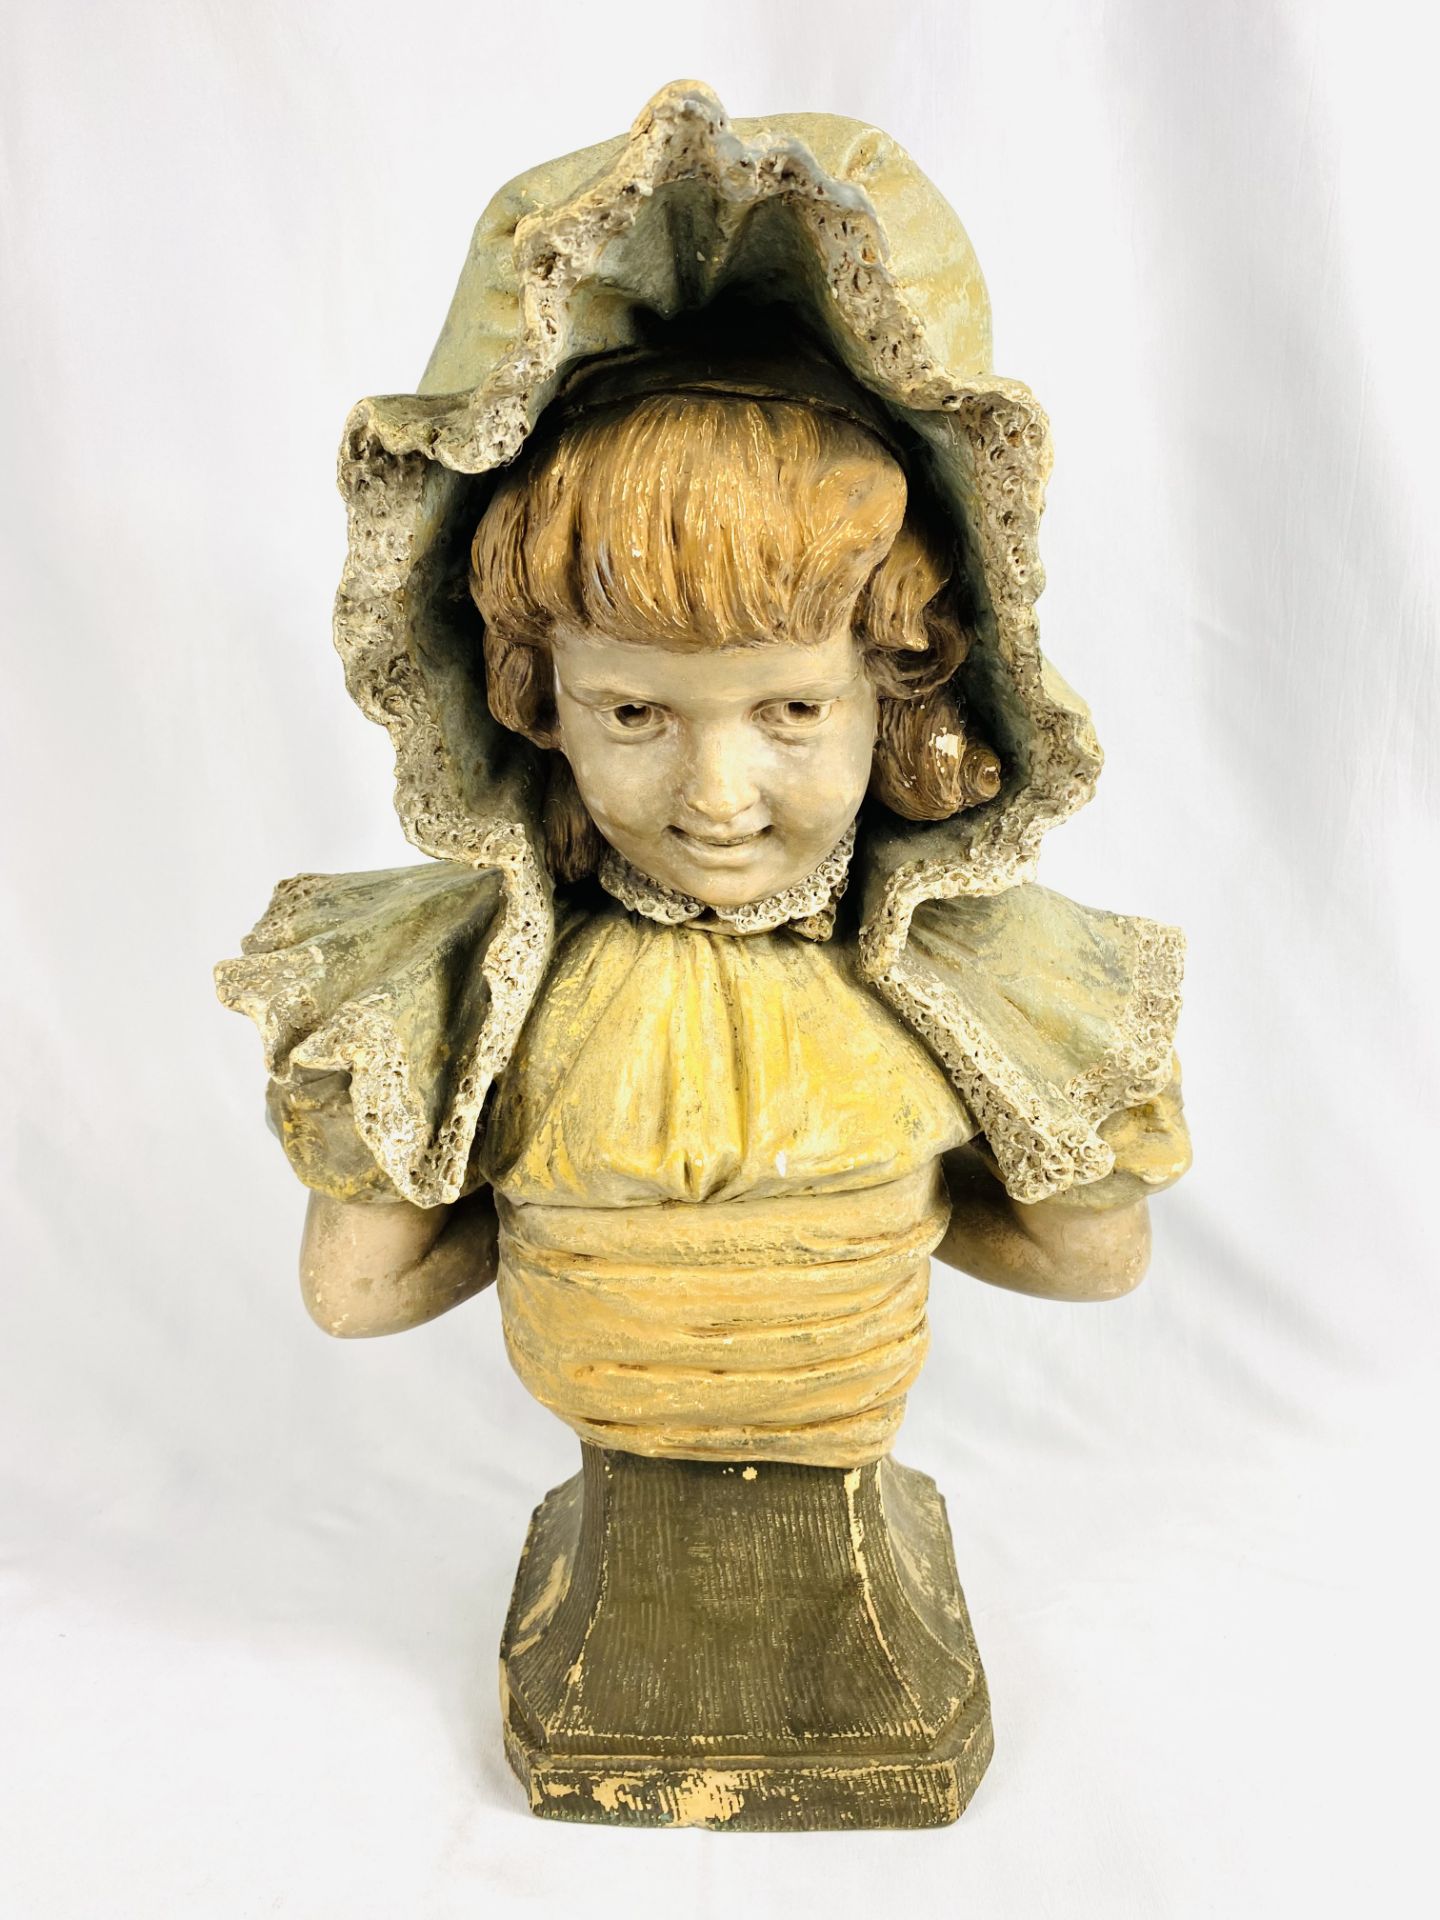 Pottery bust of an Edwardian girl. From the Estate of Dame Mary Quant